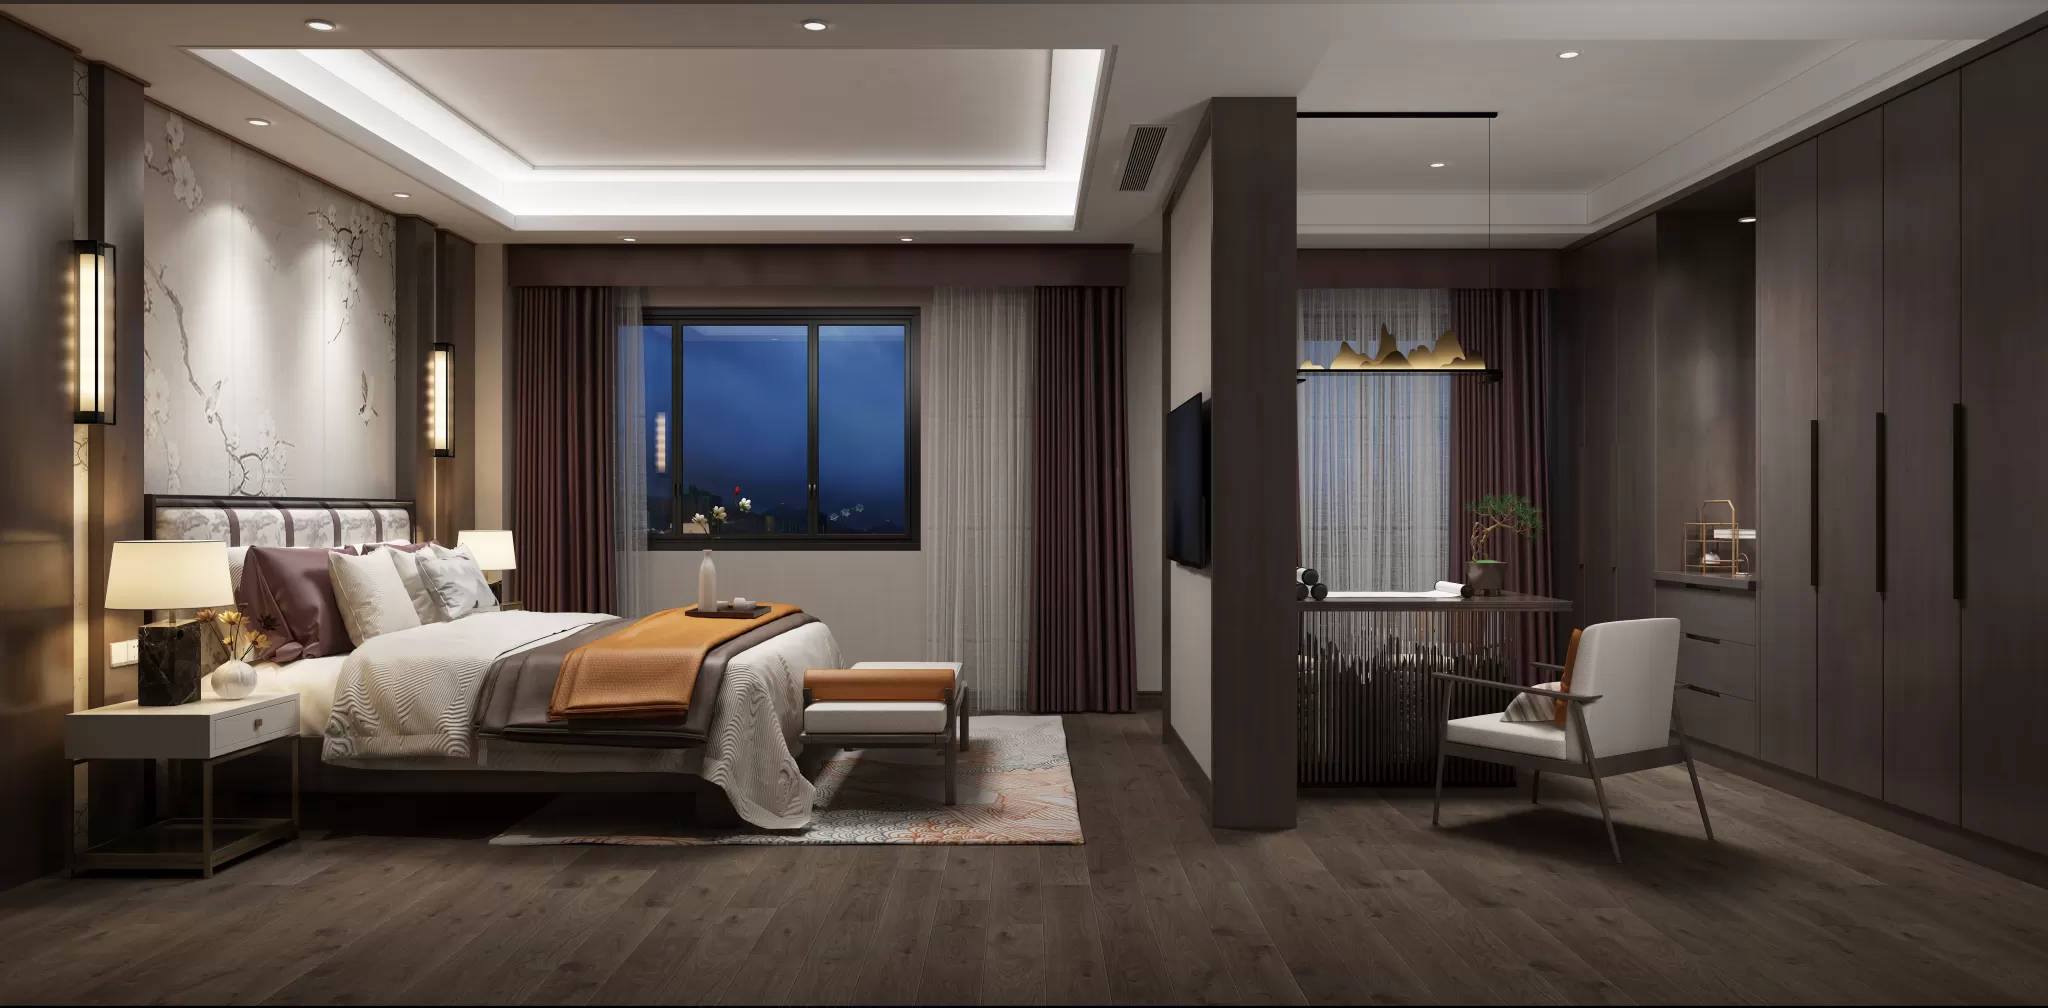 DESMOD INTERIOR 2021 (VRAY)/5. BEDROOM – 2. CHINESE STYLES – 046